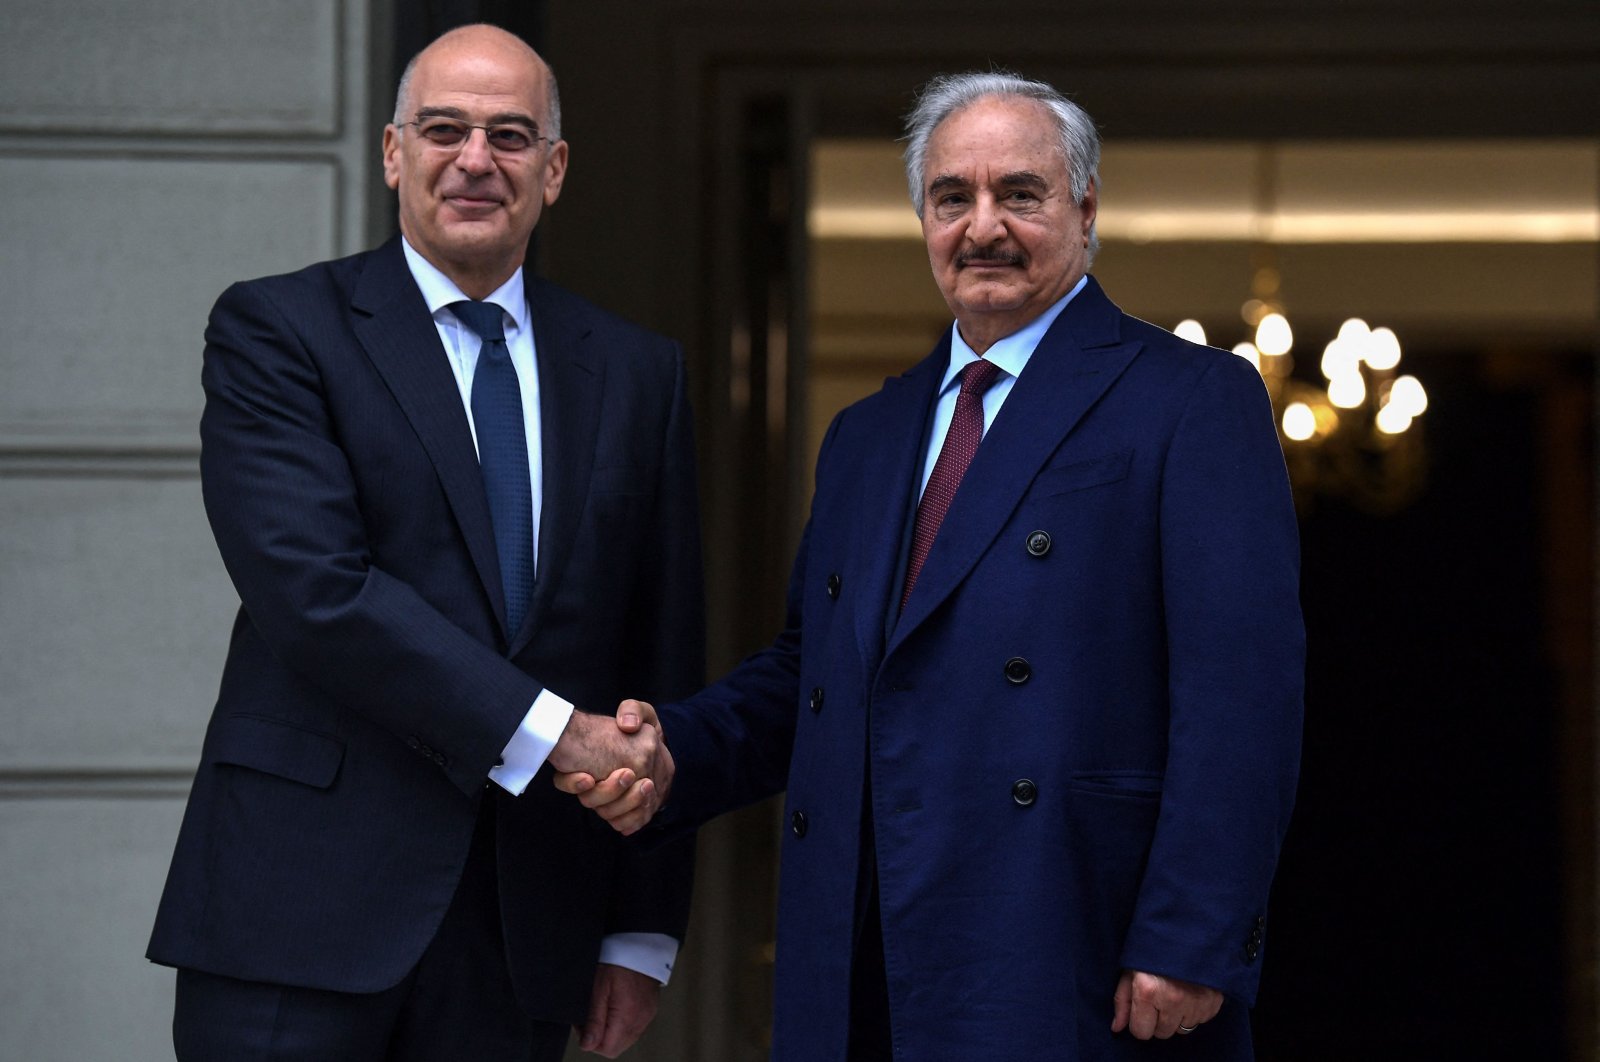  In this file photo taken on Jan. 17, 2020, Greek Foreign Minister Nikos Dendias (L) welcomes putschist Gen. Khalifa Haftar before talks in Athens, days ahead of a peace conference in Berlin. (AFP File Photo)